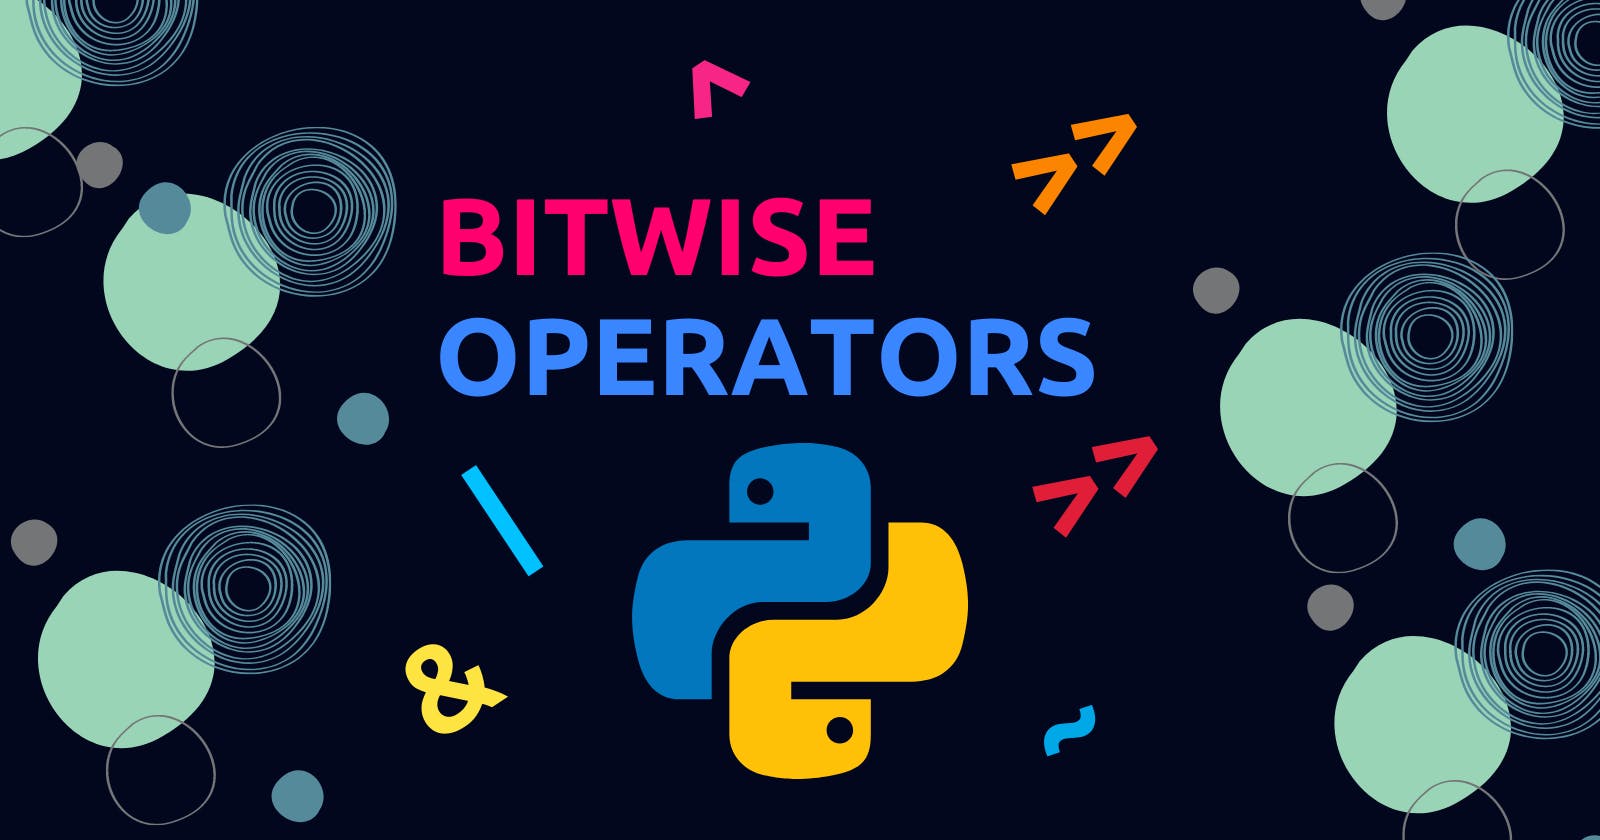 Python Bitwise Operators With Examples - Explained In Detail